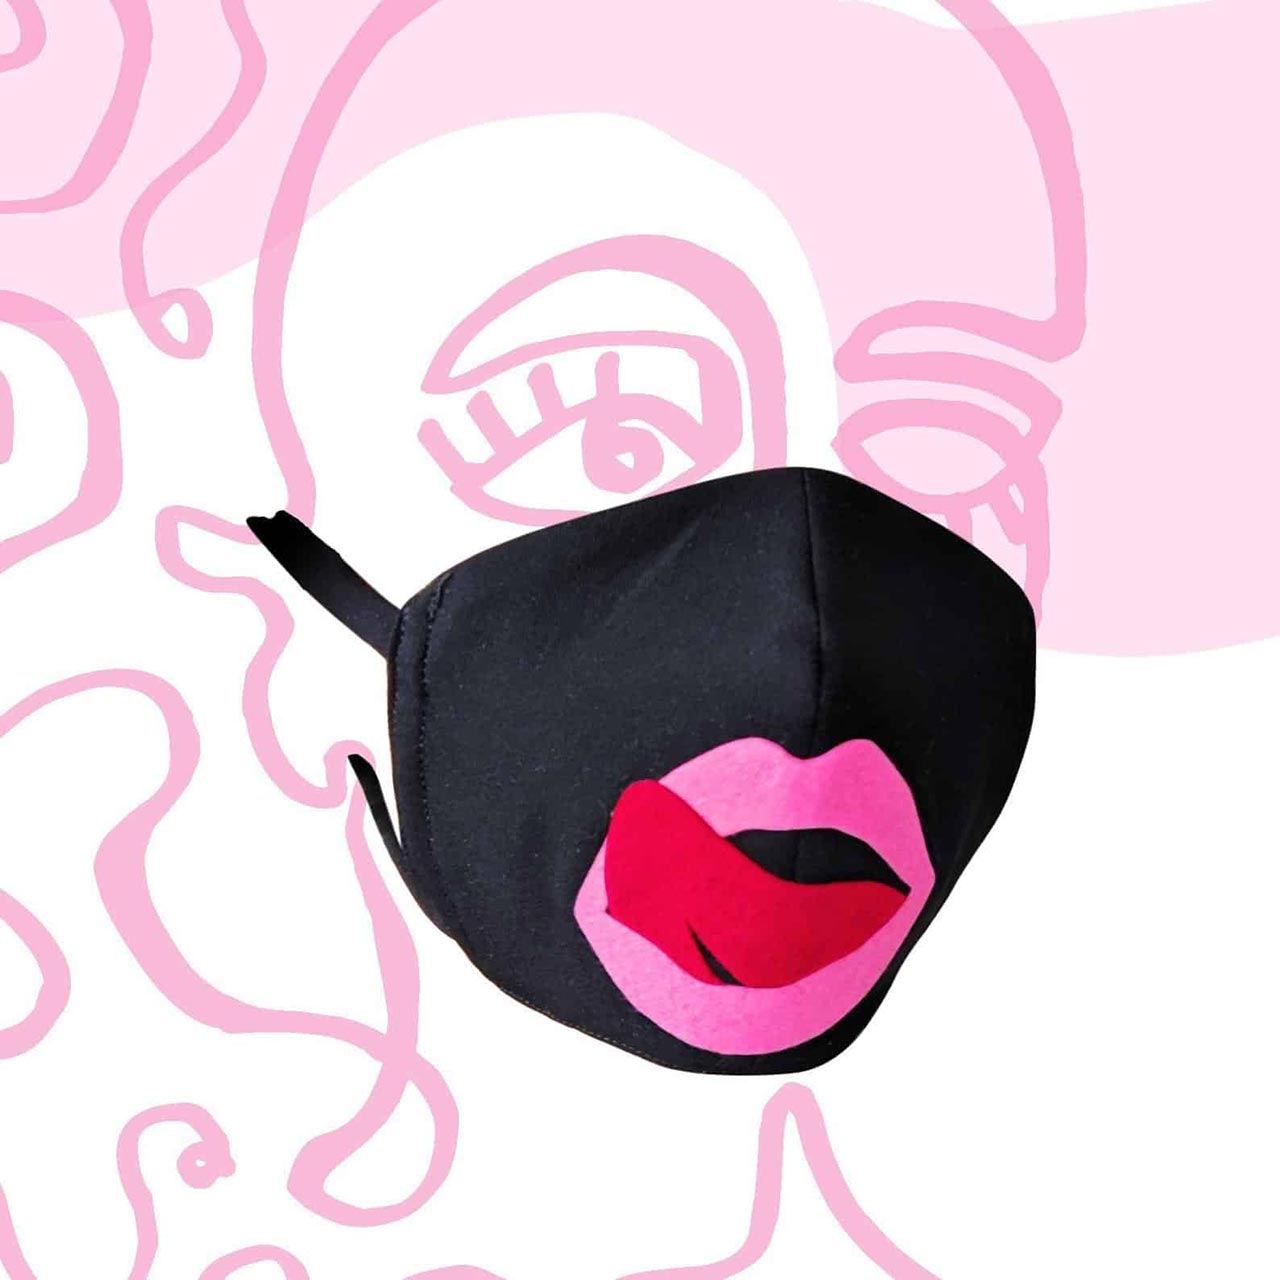 Gucci face mask pink